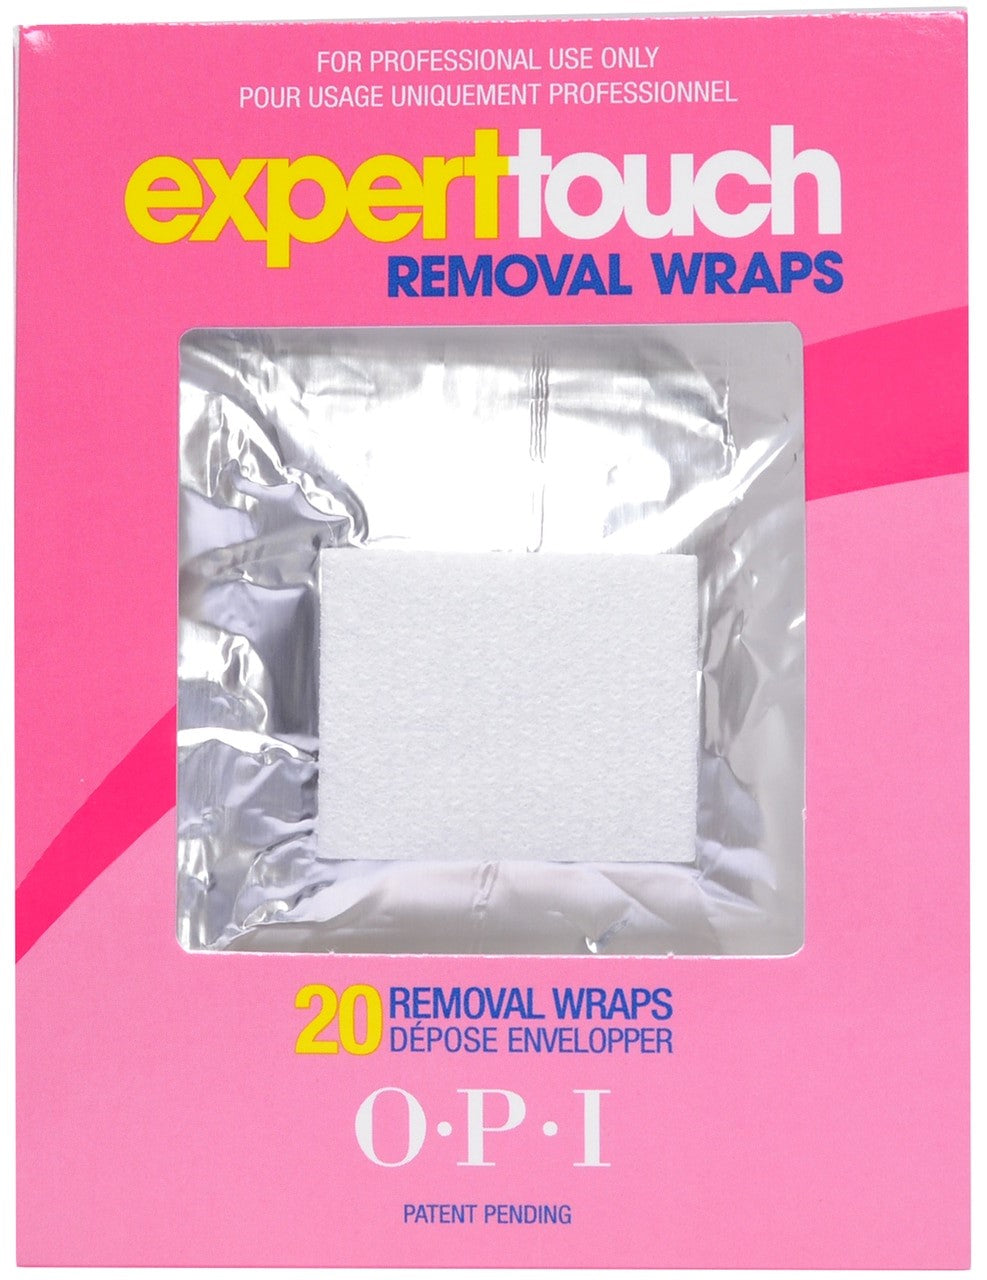 Expert Touch Removal Wraps